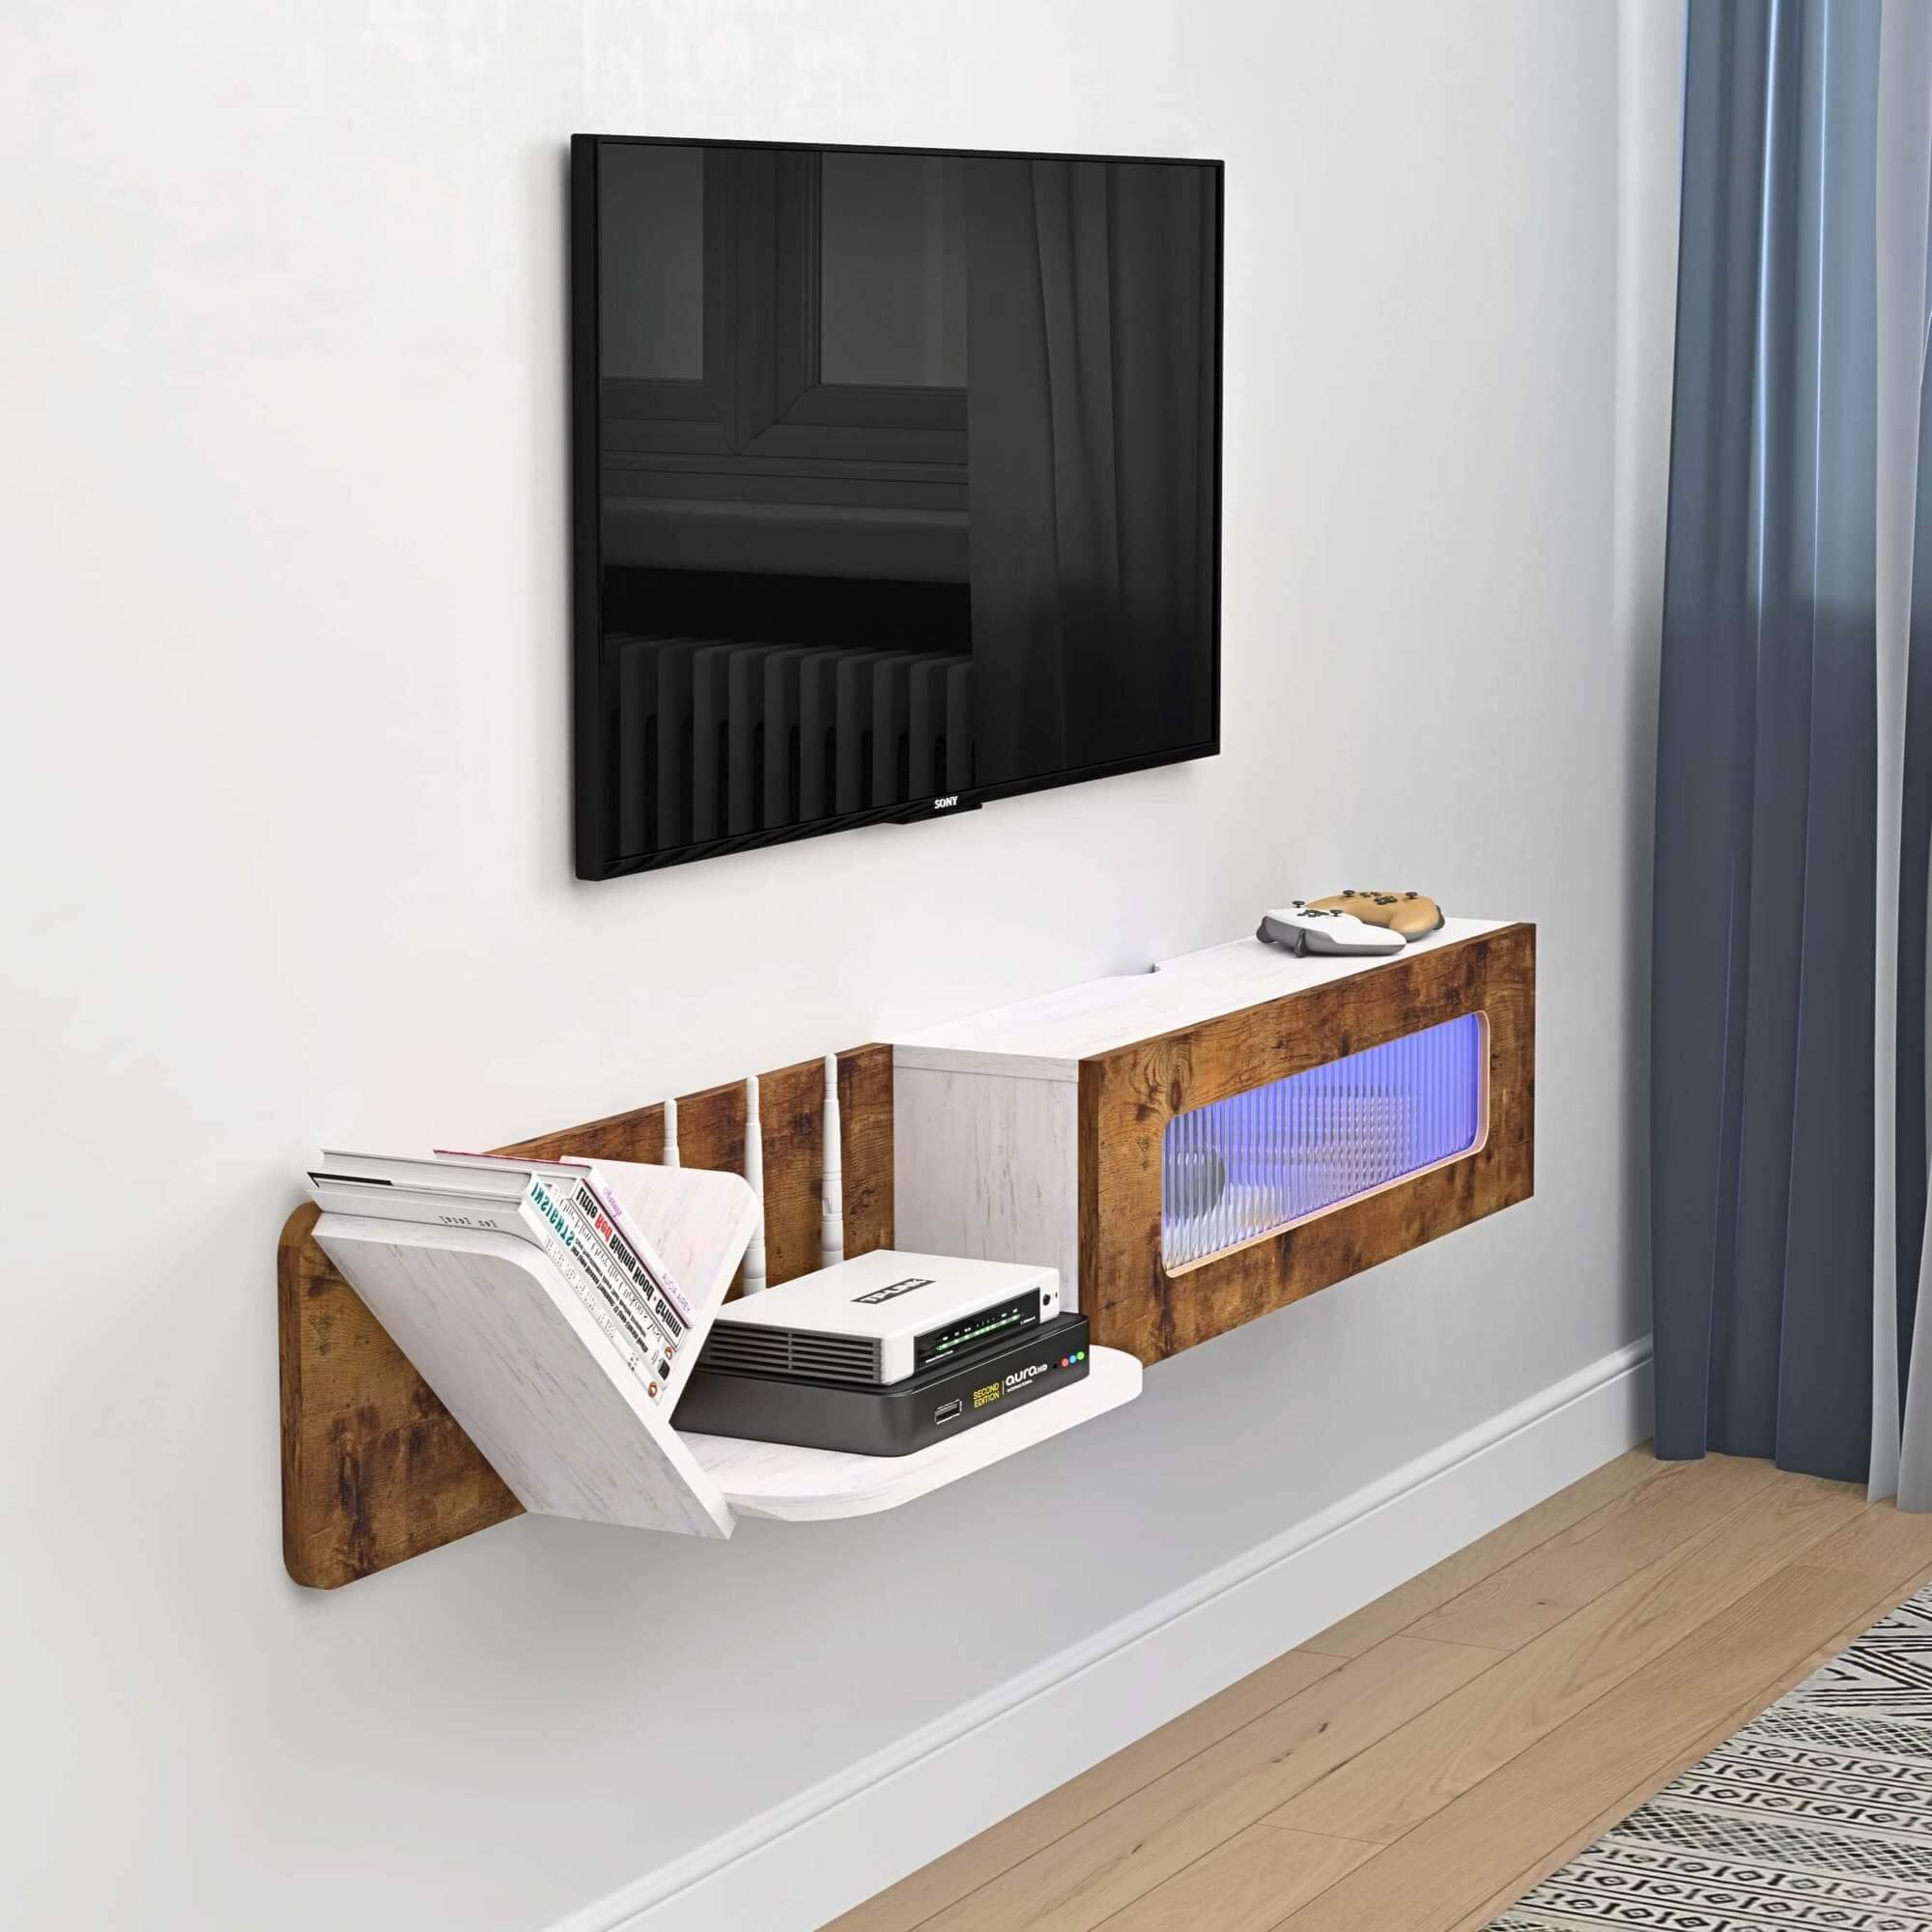 66.92" Modern Rustic Brown and White Plywood Floating TV Stand with LED Lights and Glass Door